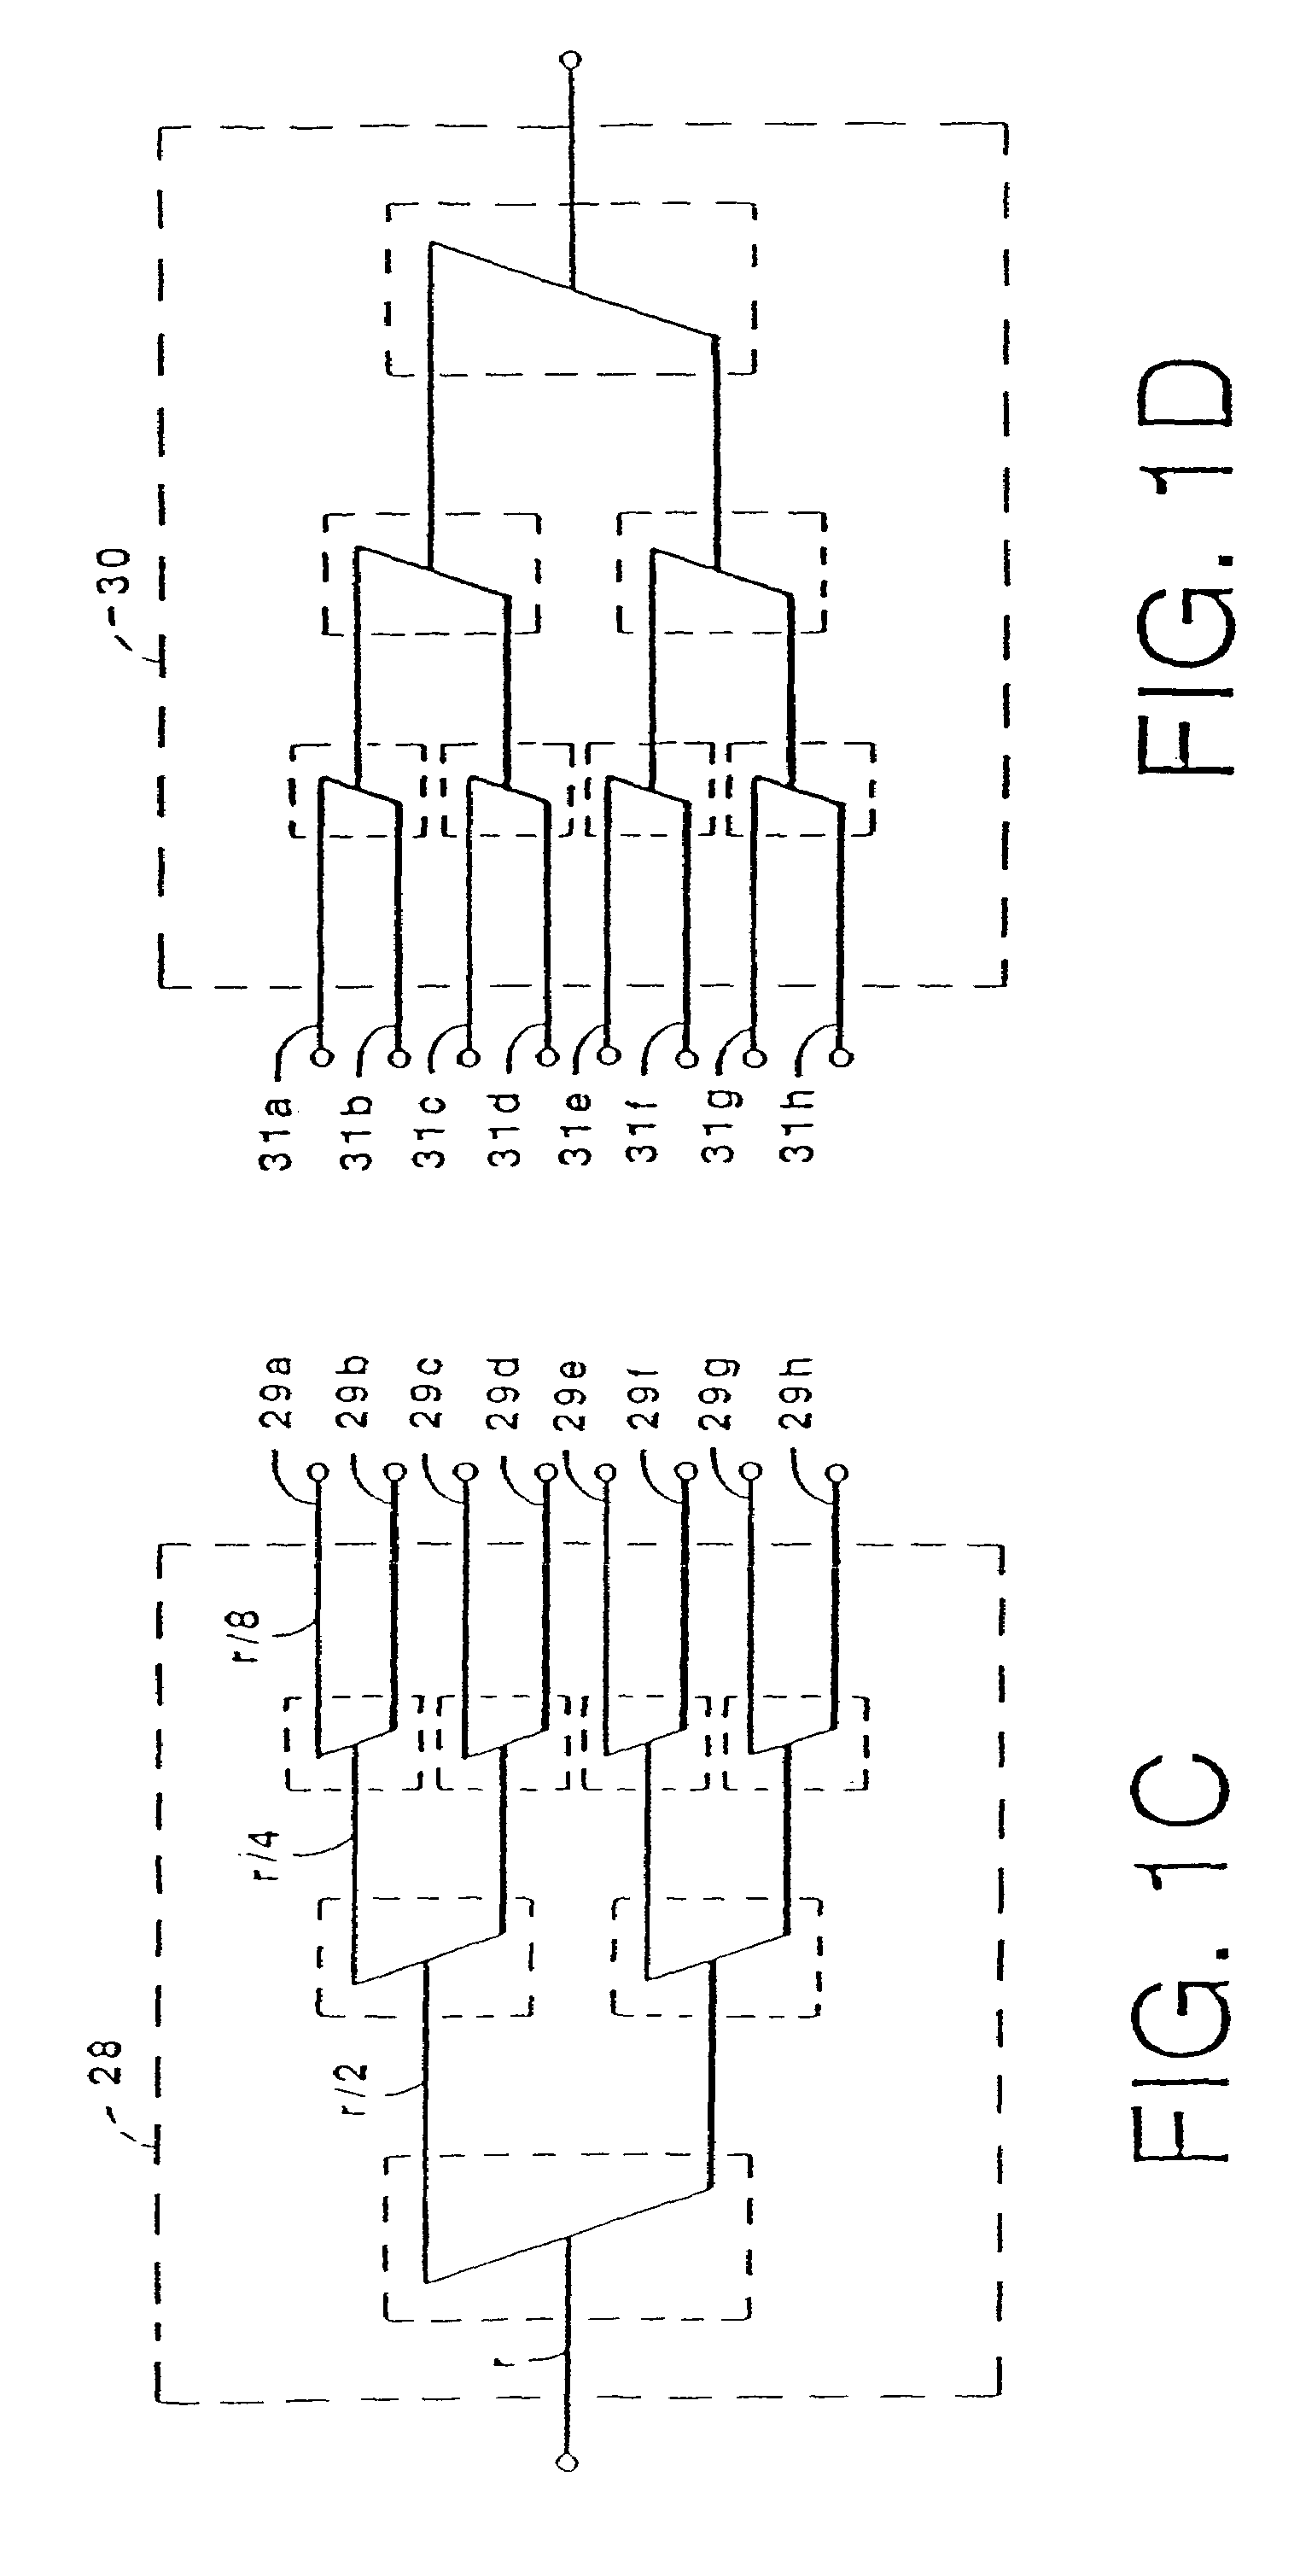 Compensation for non-linear distortion in a modem receiver